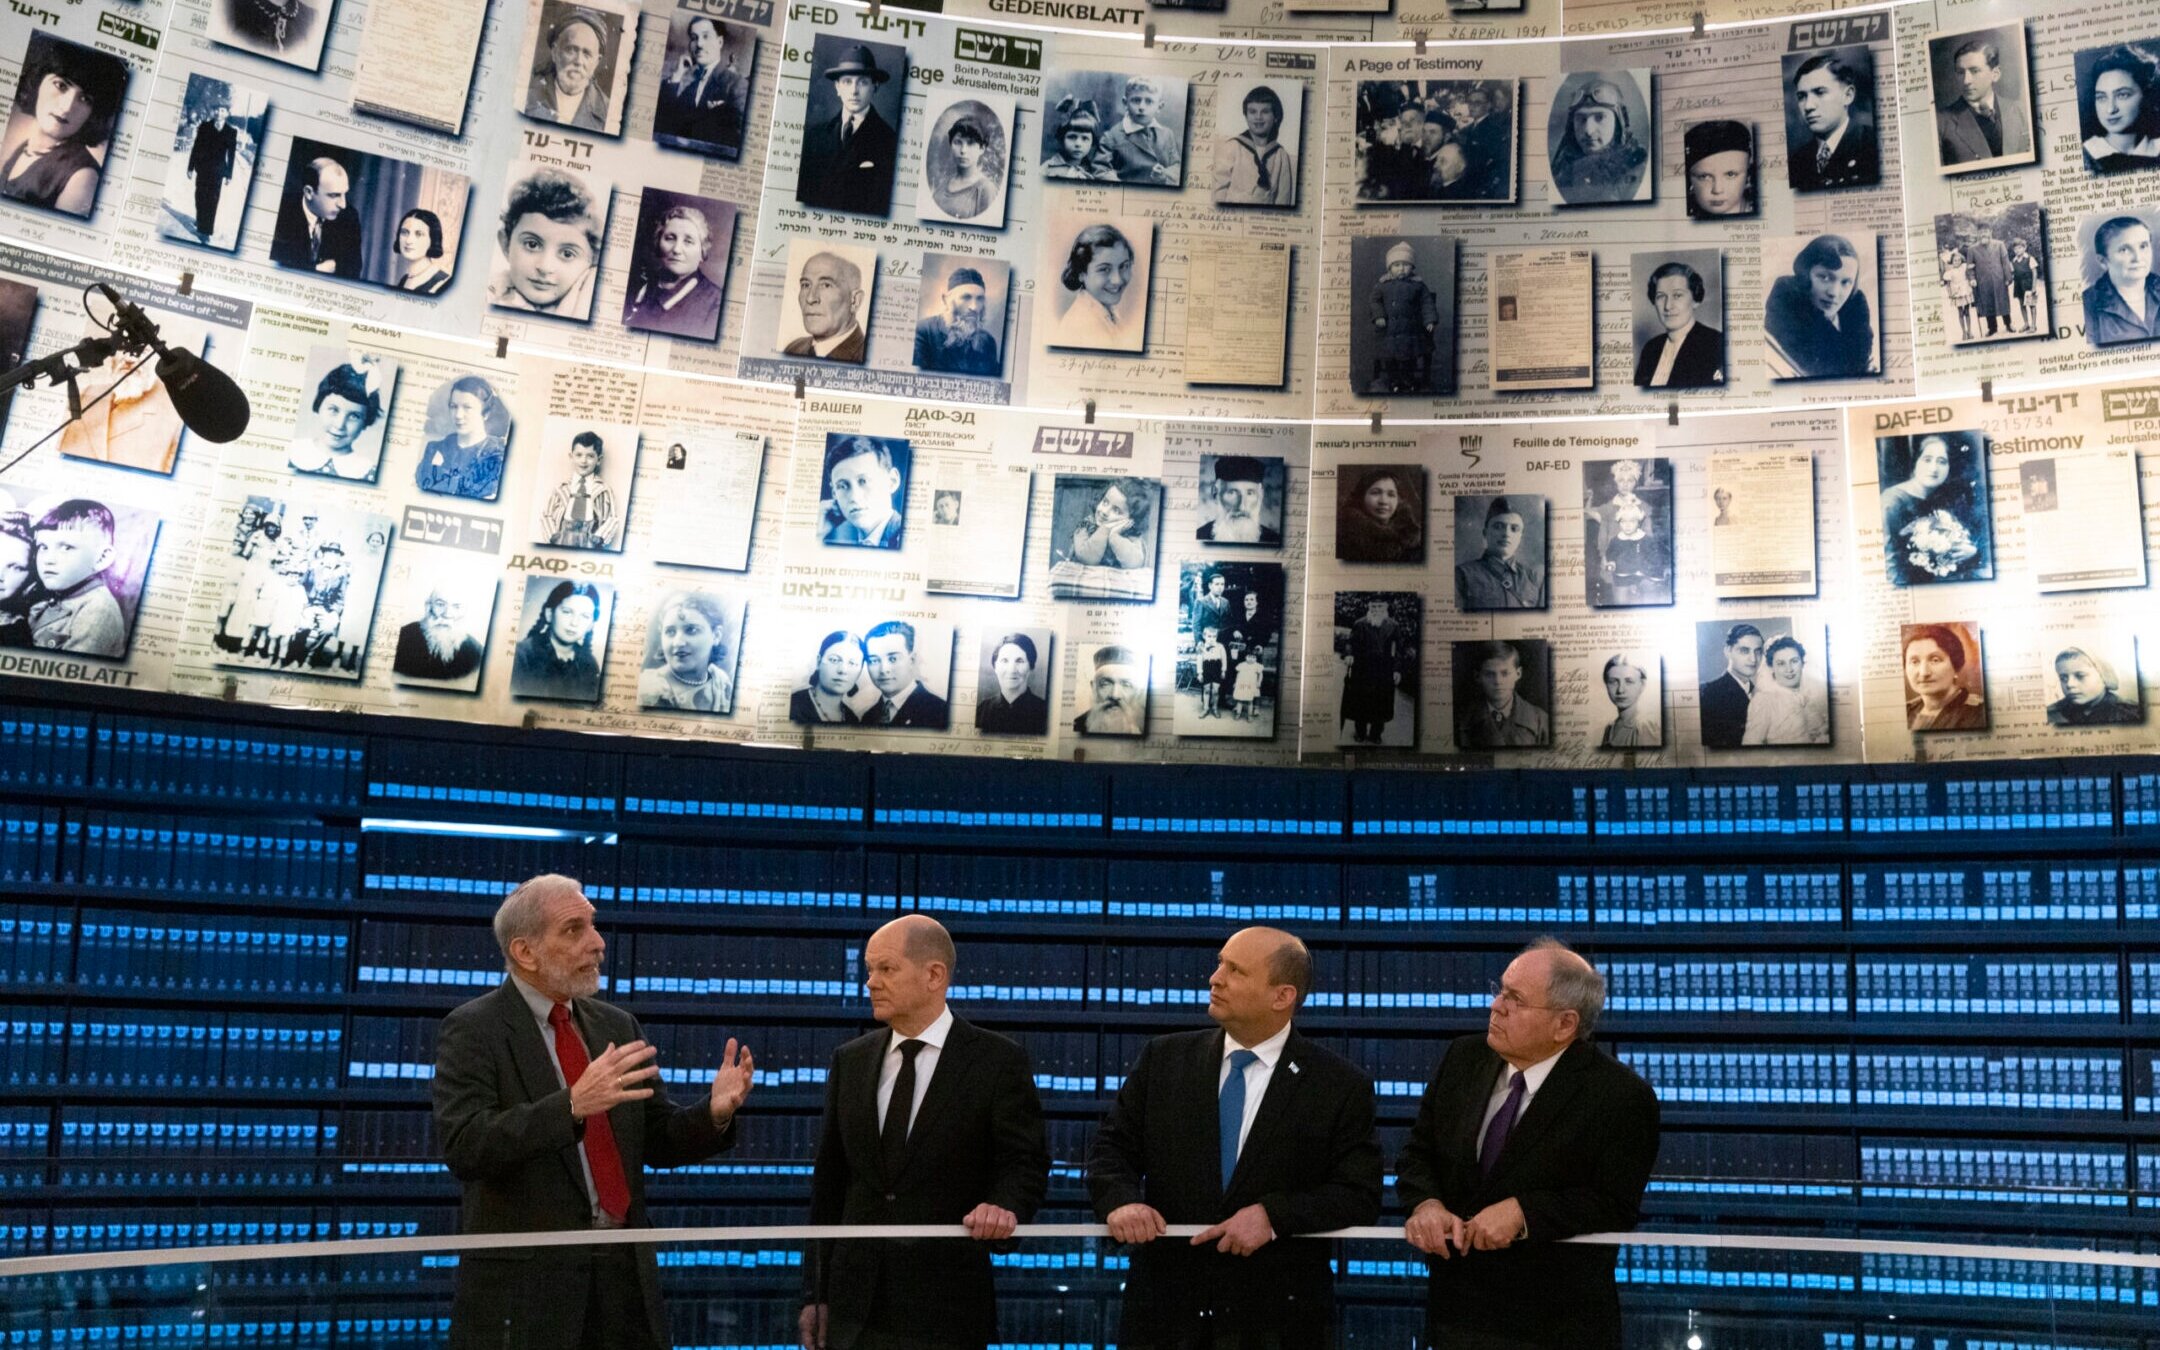 Yad Vashem Chairman Dani Dayan, second from right, with Israeli and German officials at Yad Vashem, Israel’s Holocaust memorial museum, in Jerusalem, March 2, 2022. (Olivier Fitoussi/Flash90)